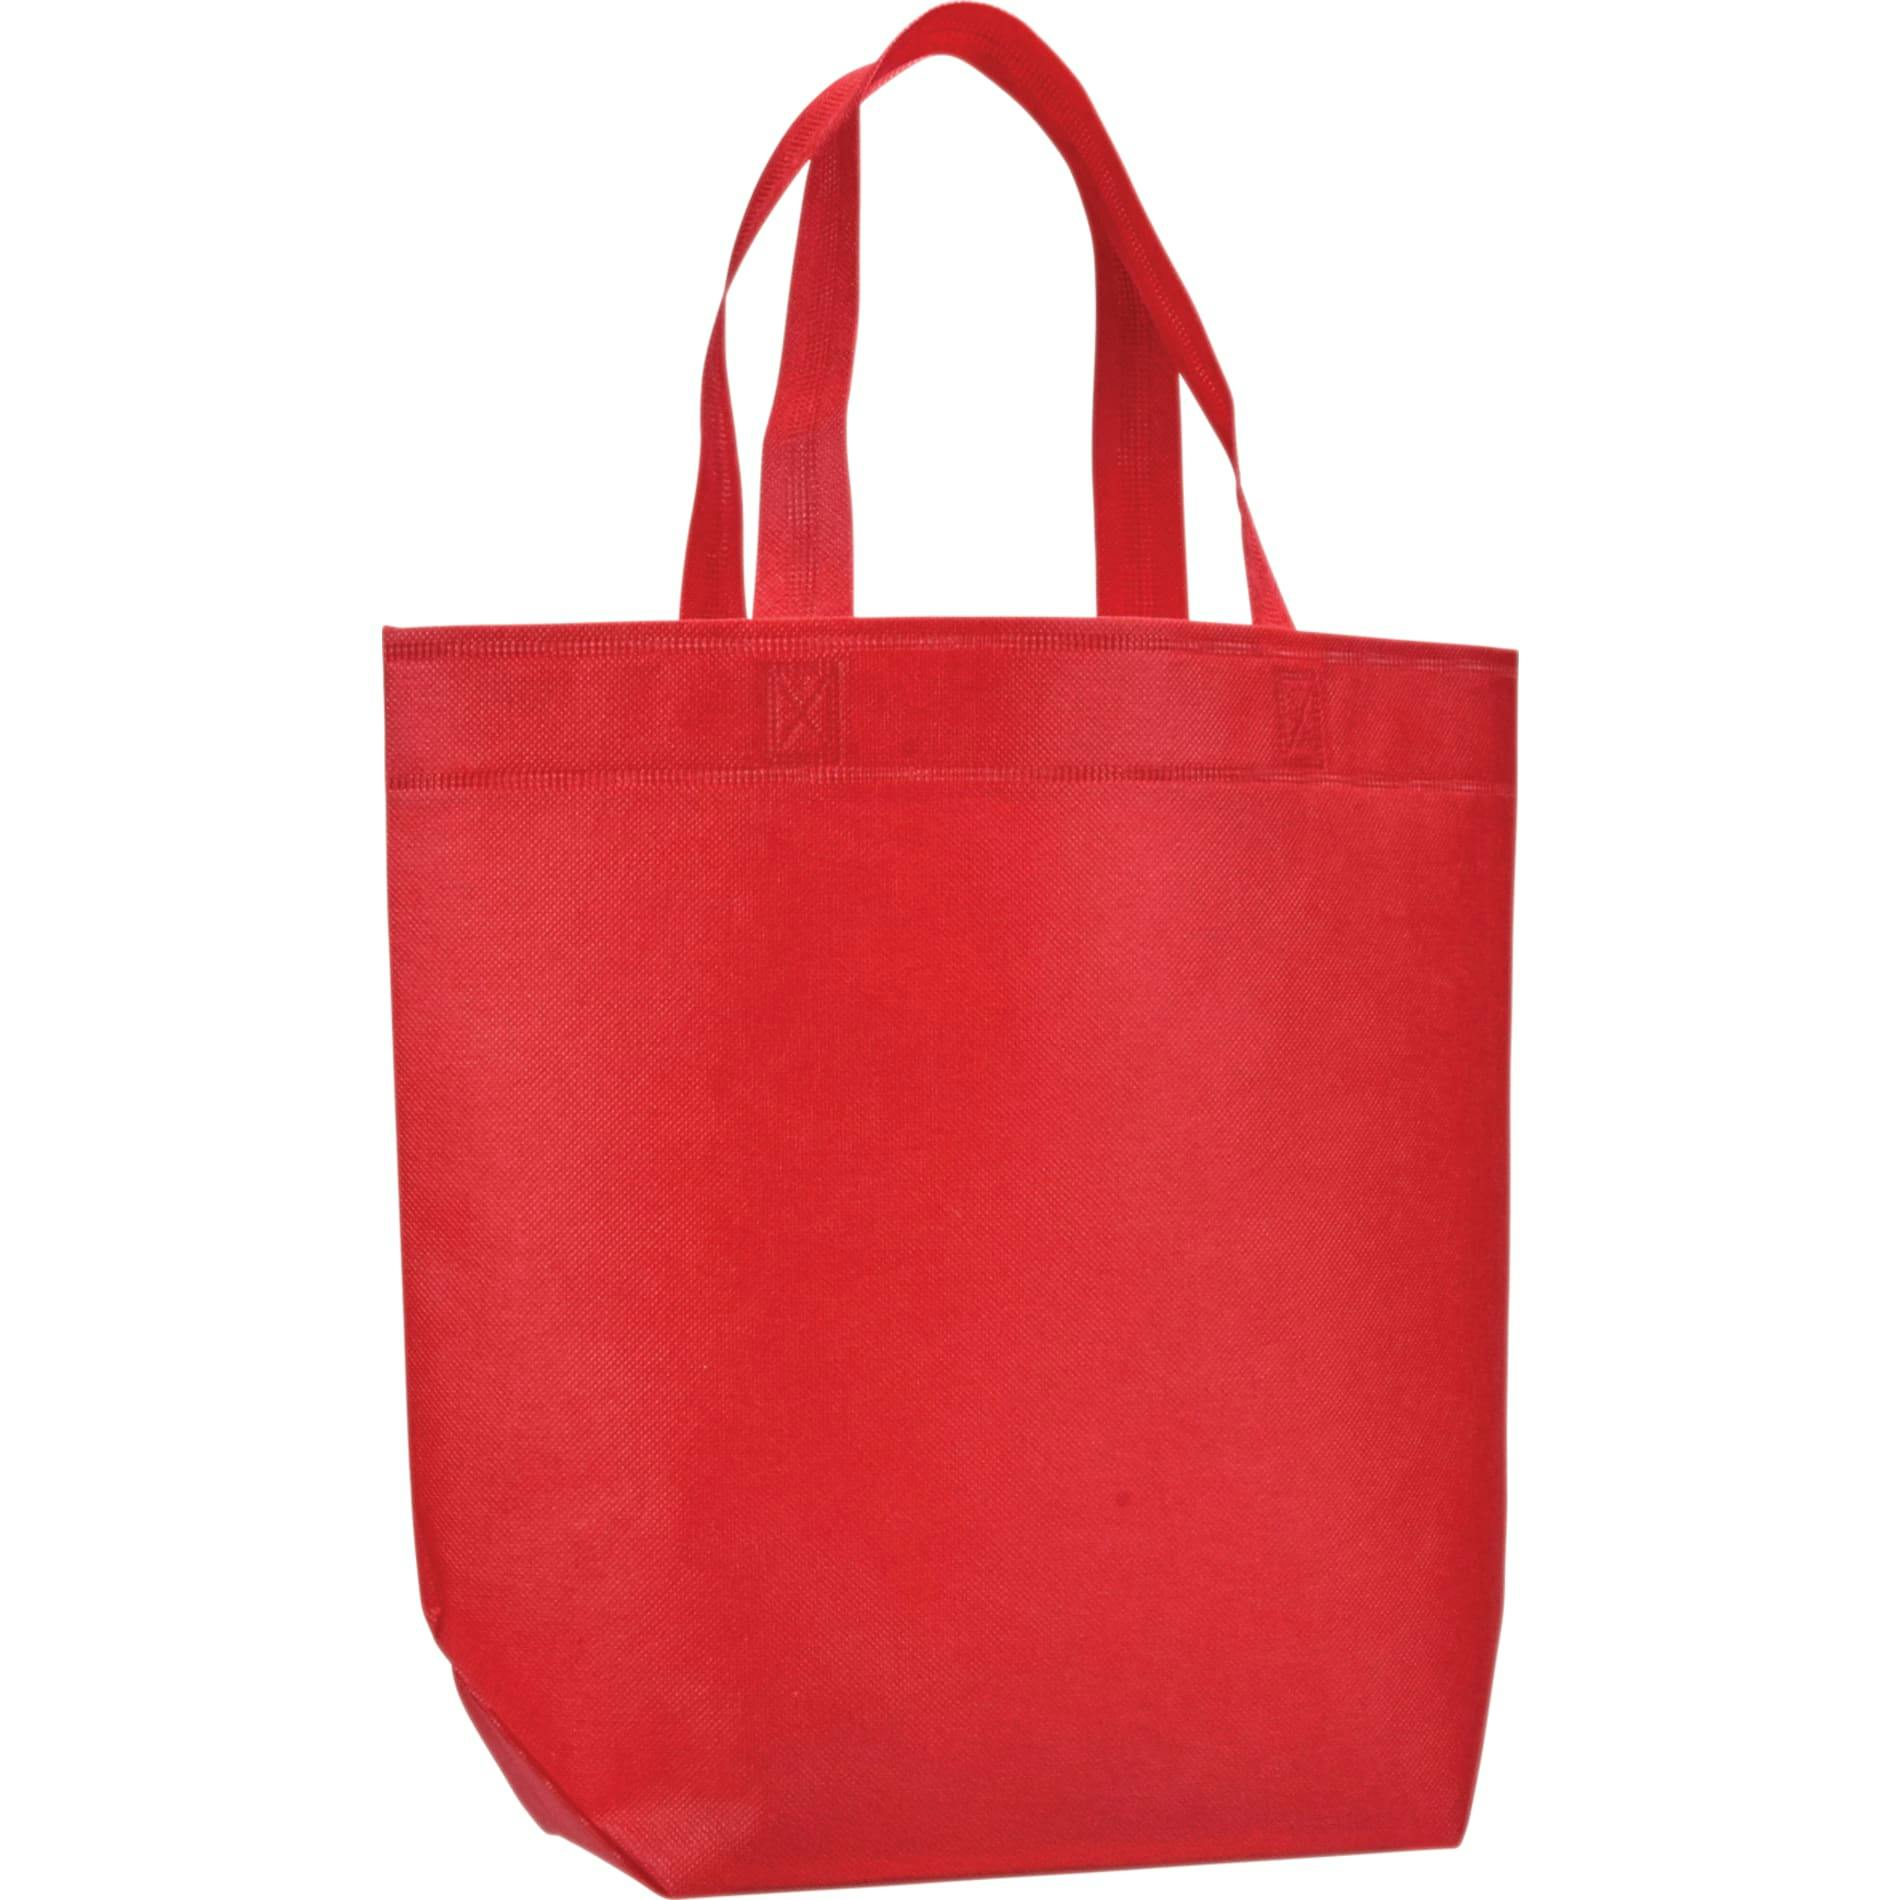 Challenger Non-Woven Shopper Tote - additional Image 2